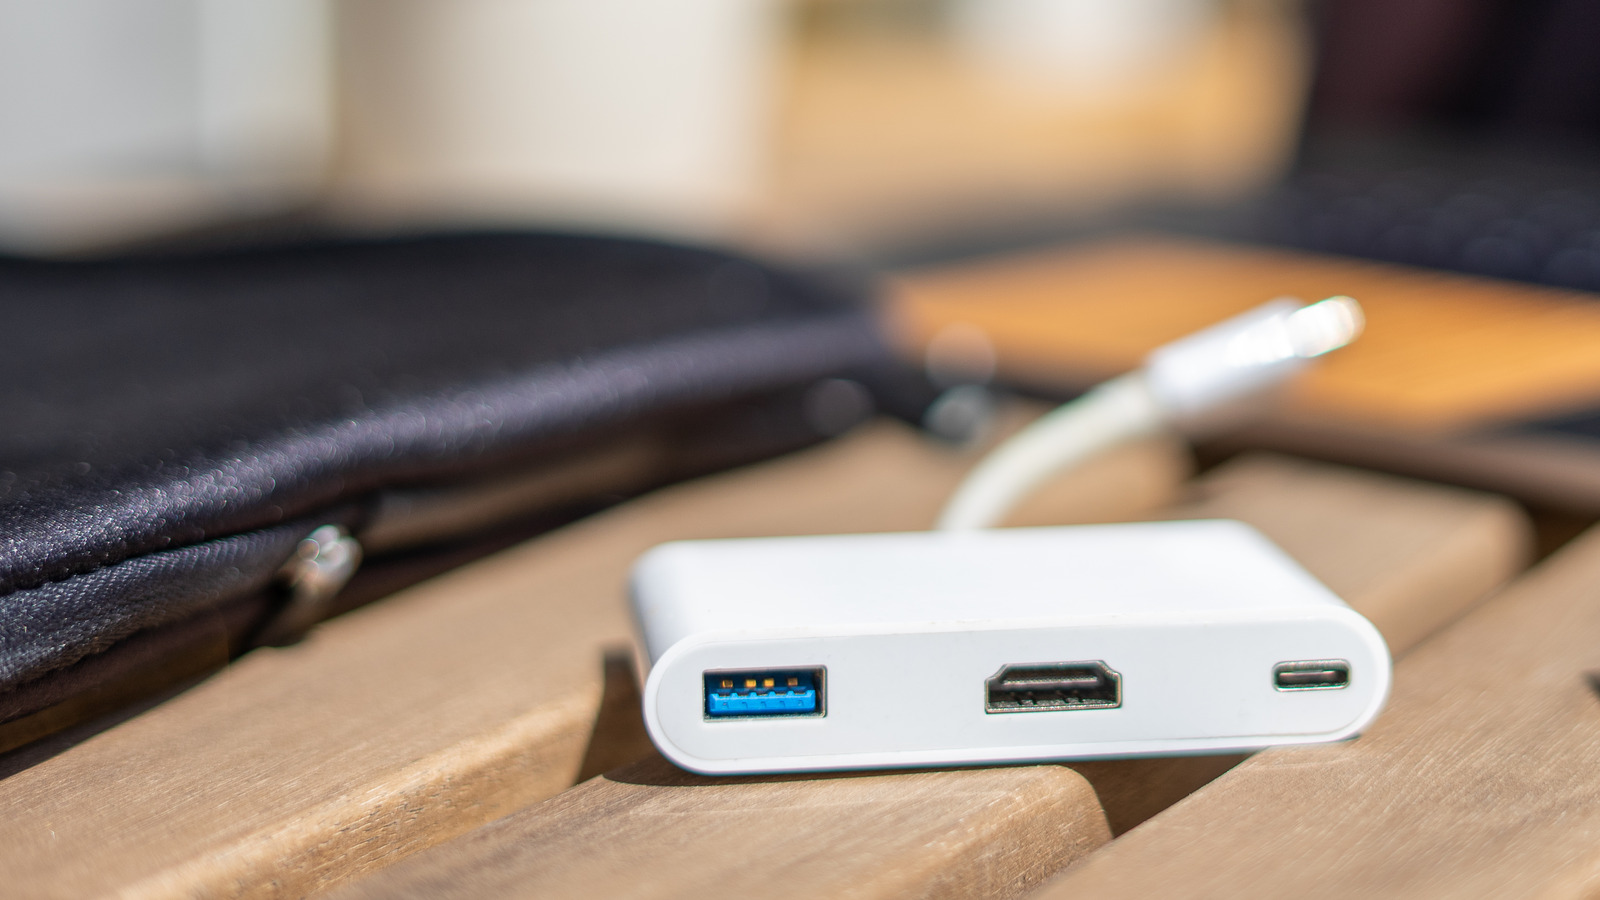 Top 5 USB C To HDMI Adapter Reviews